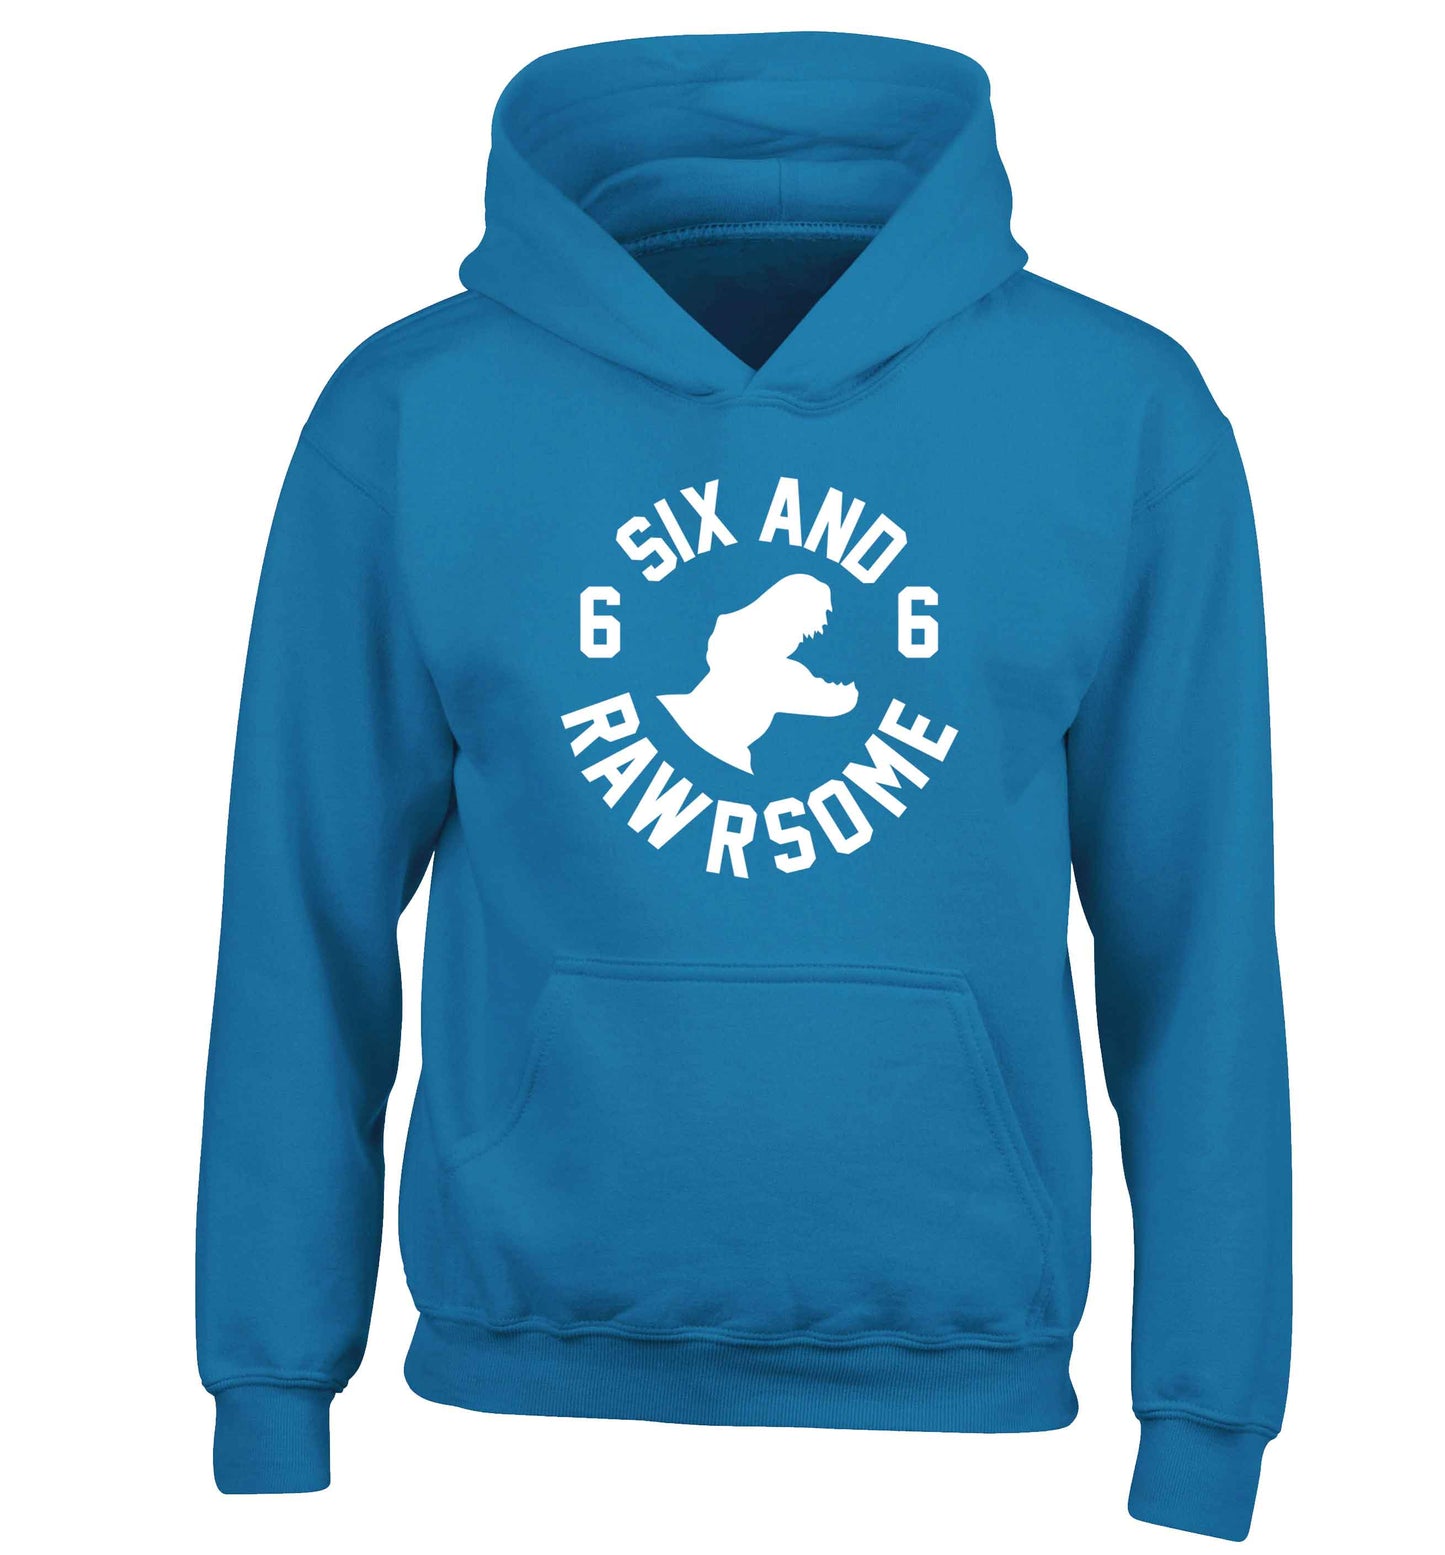 Six and rawrsome children's blue hoodie 12-13 Years